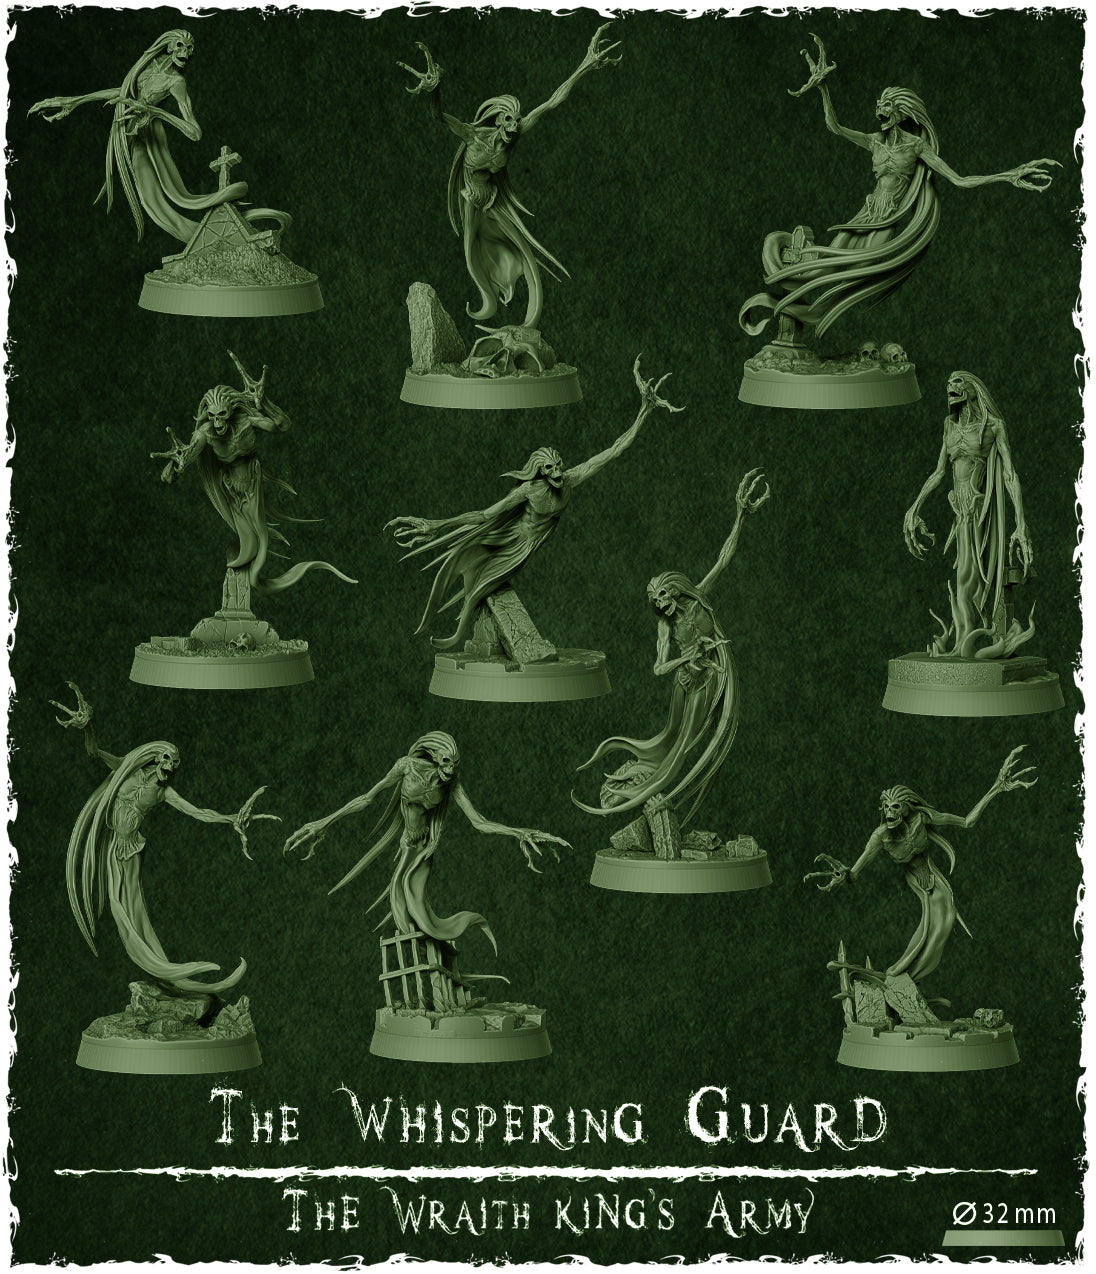 Whispering Guard - complete set